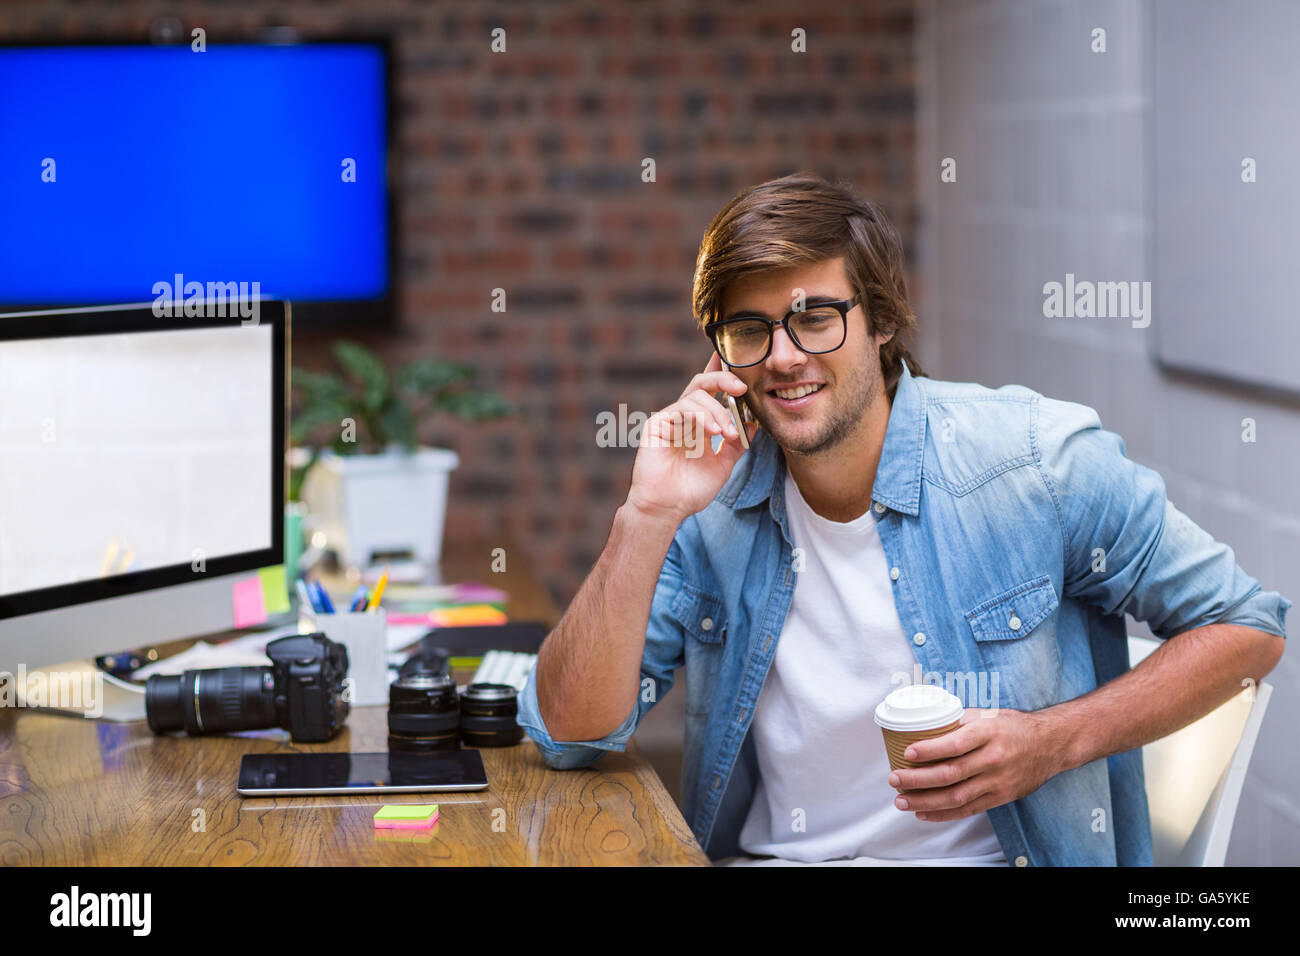 Young man talking on mobile phone in office Banque D'Images